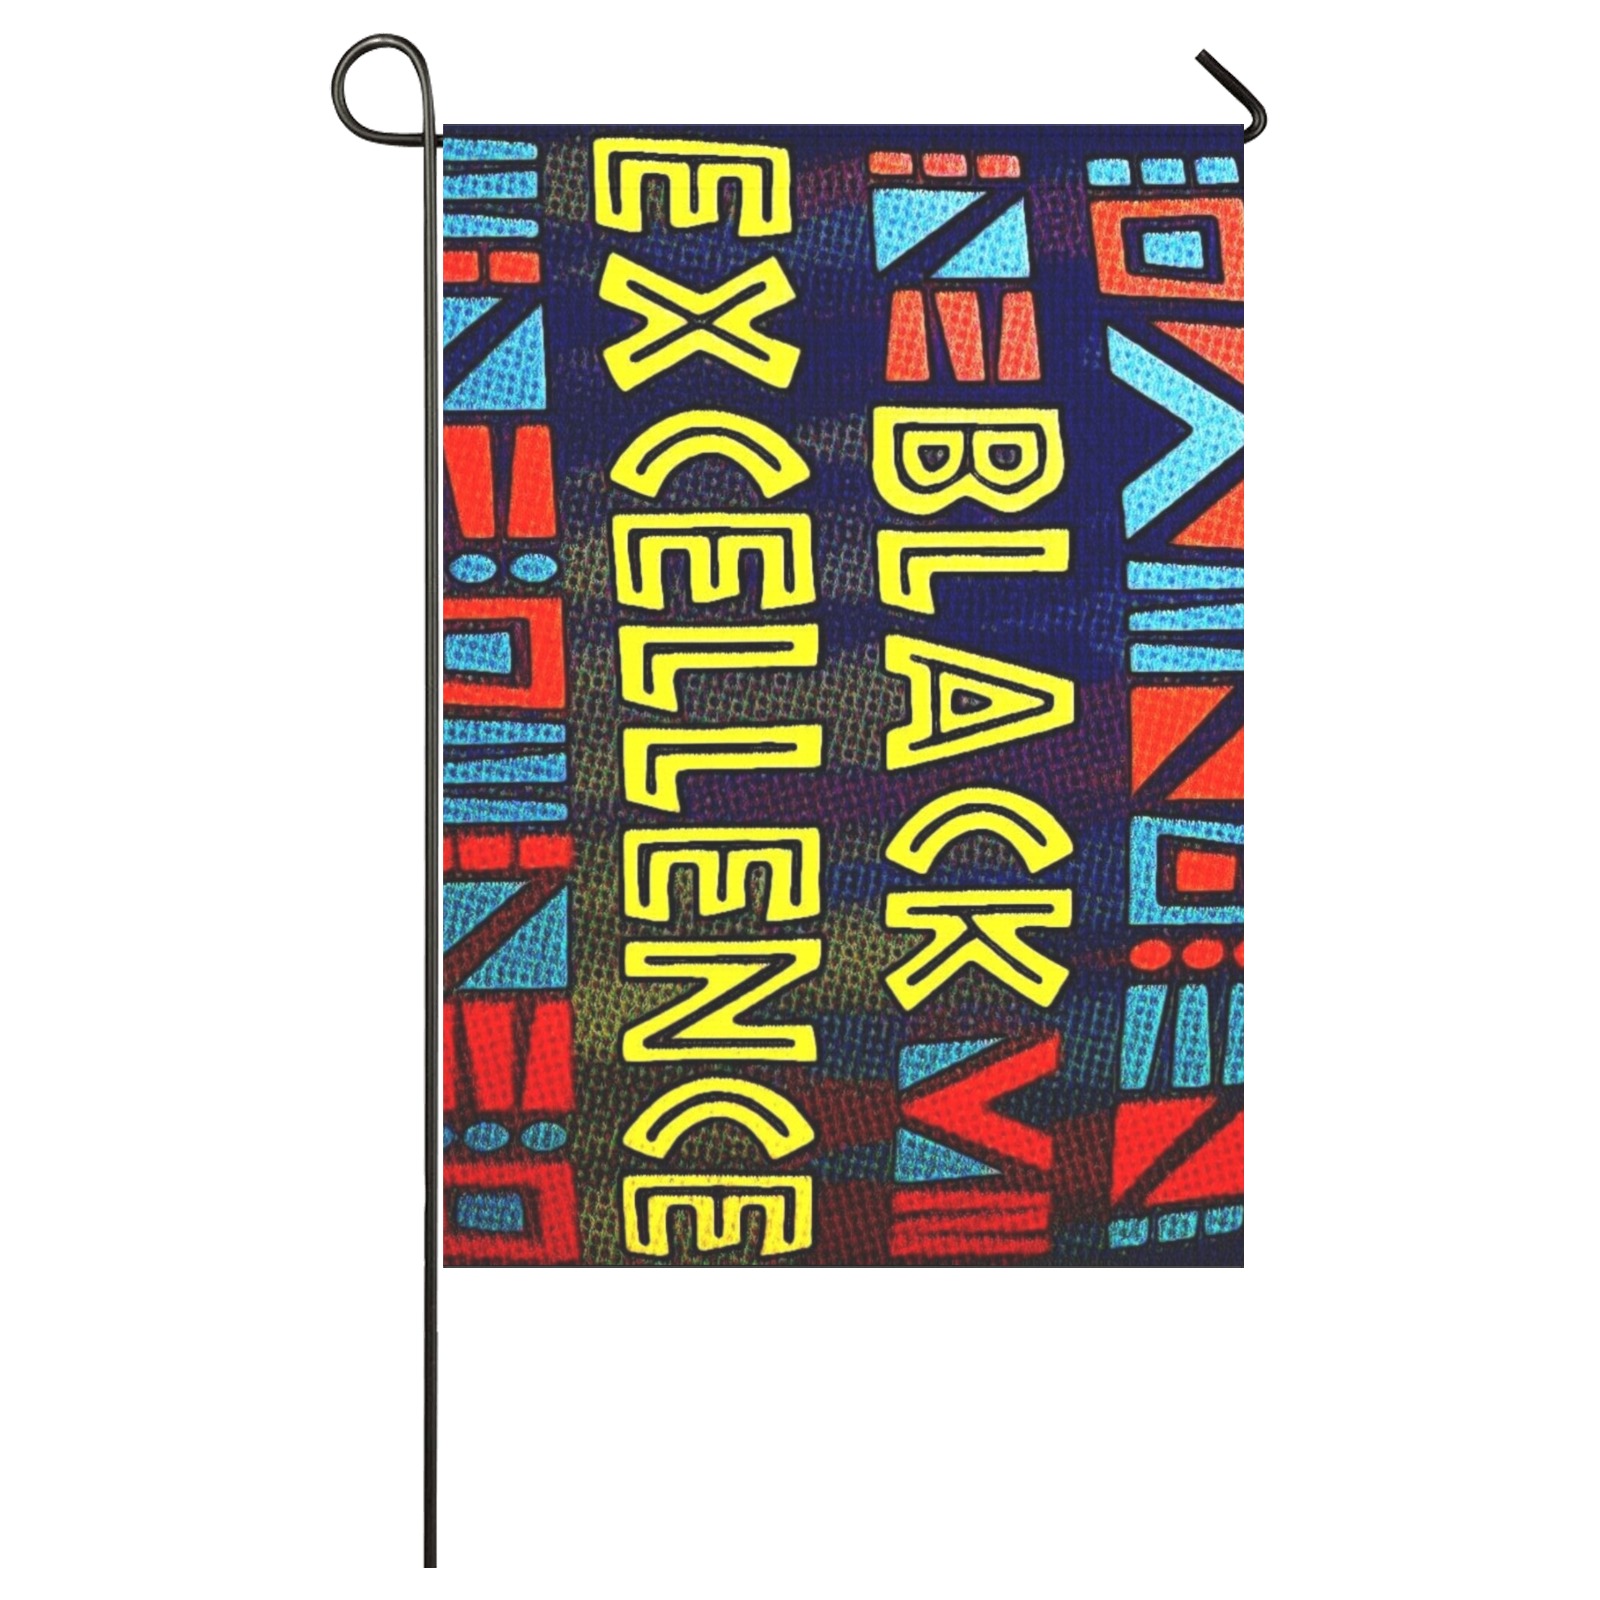 Black Excellence for life Garden Flag 28''x40'' (Two Sides Printing)